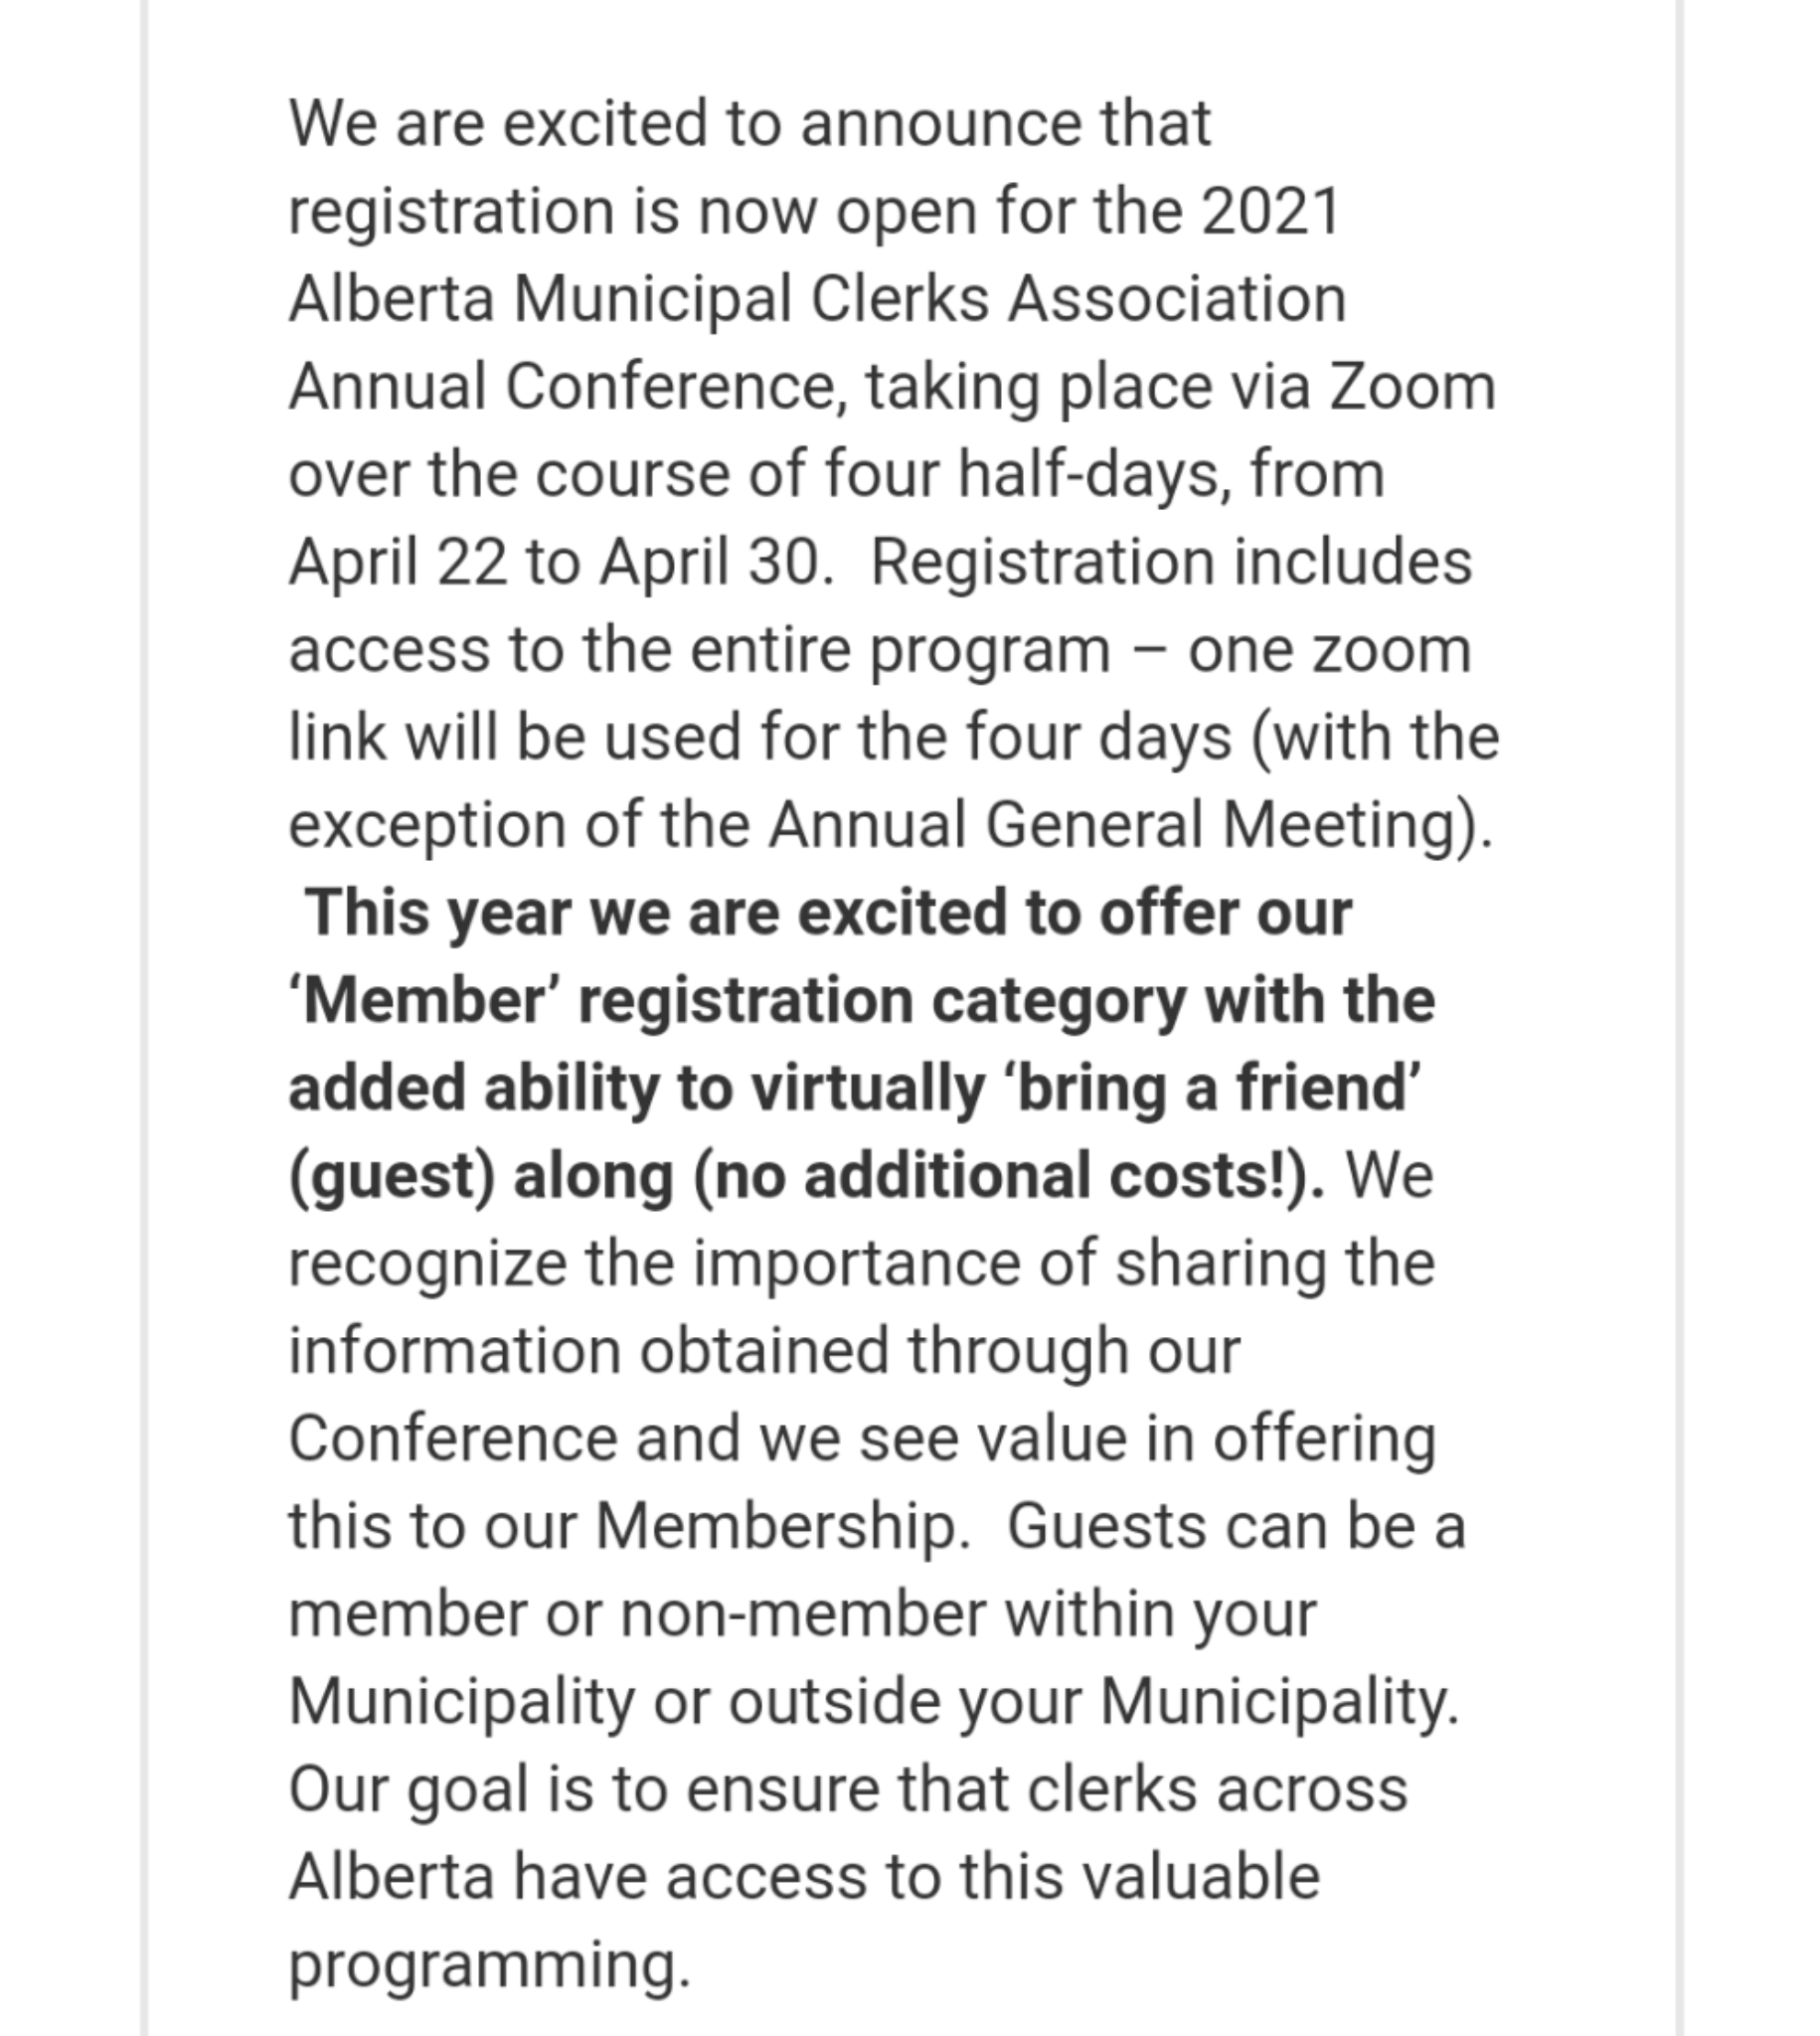 Alberta Municipal Clerks Association website post about how members can bring a guest for free to their conference. 